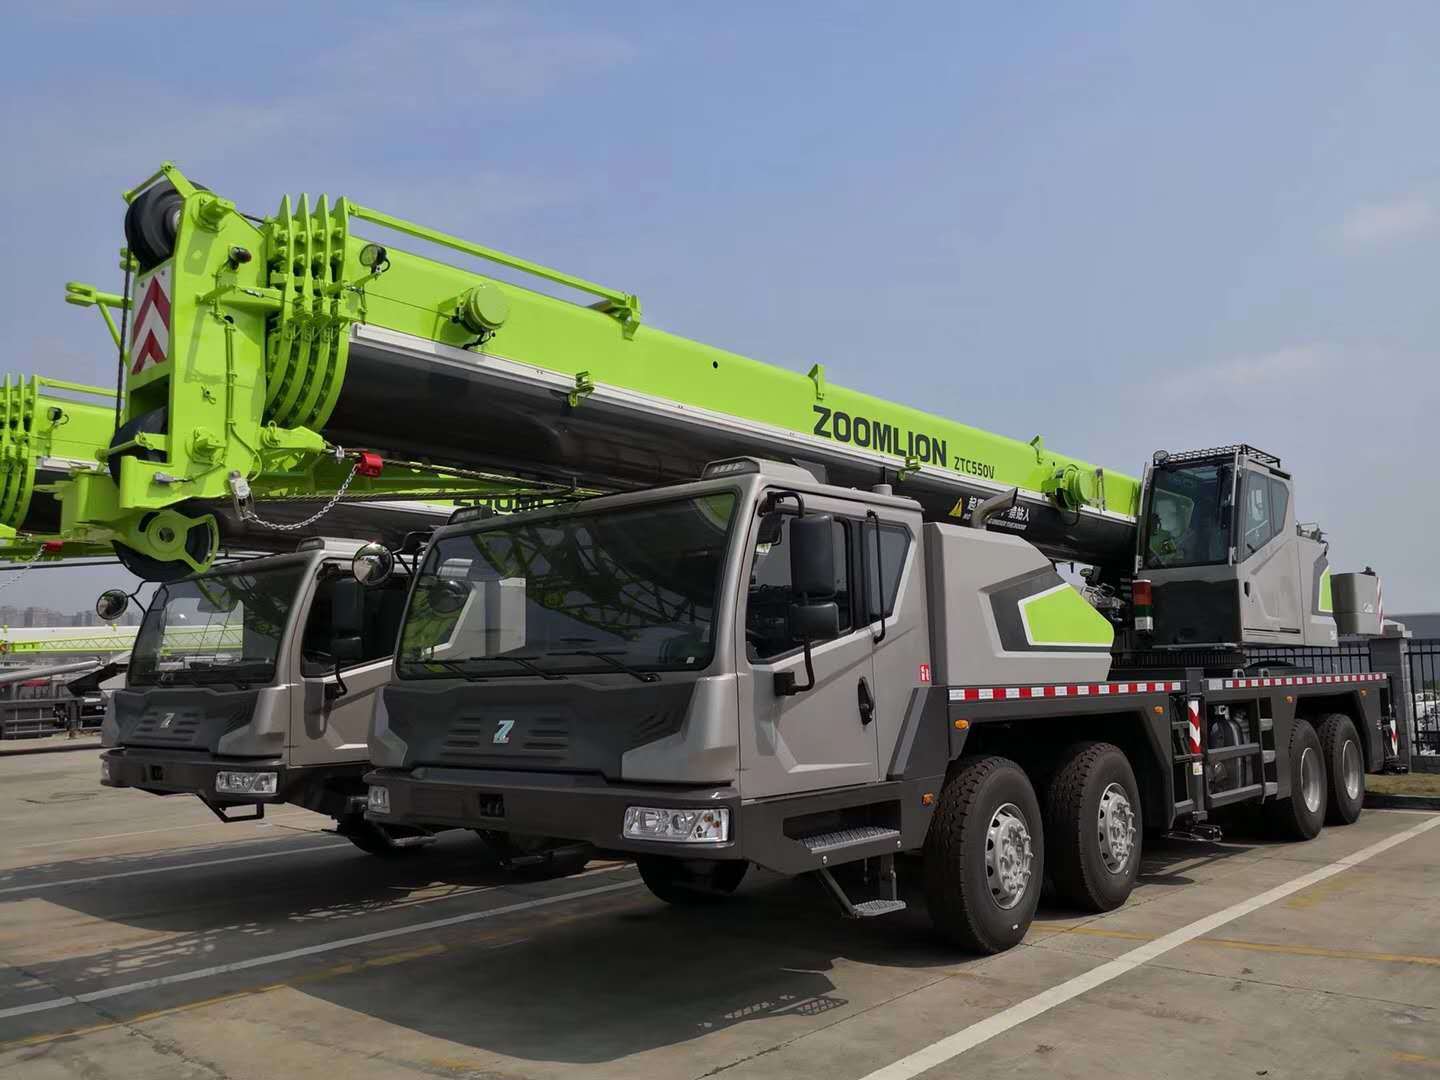 Zoomlion 55tons Truck Crane Ztc550V532 with Good Service for Sale